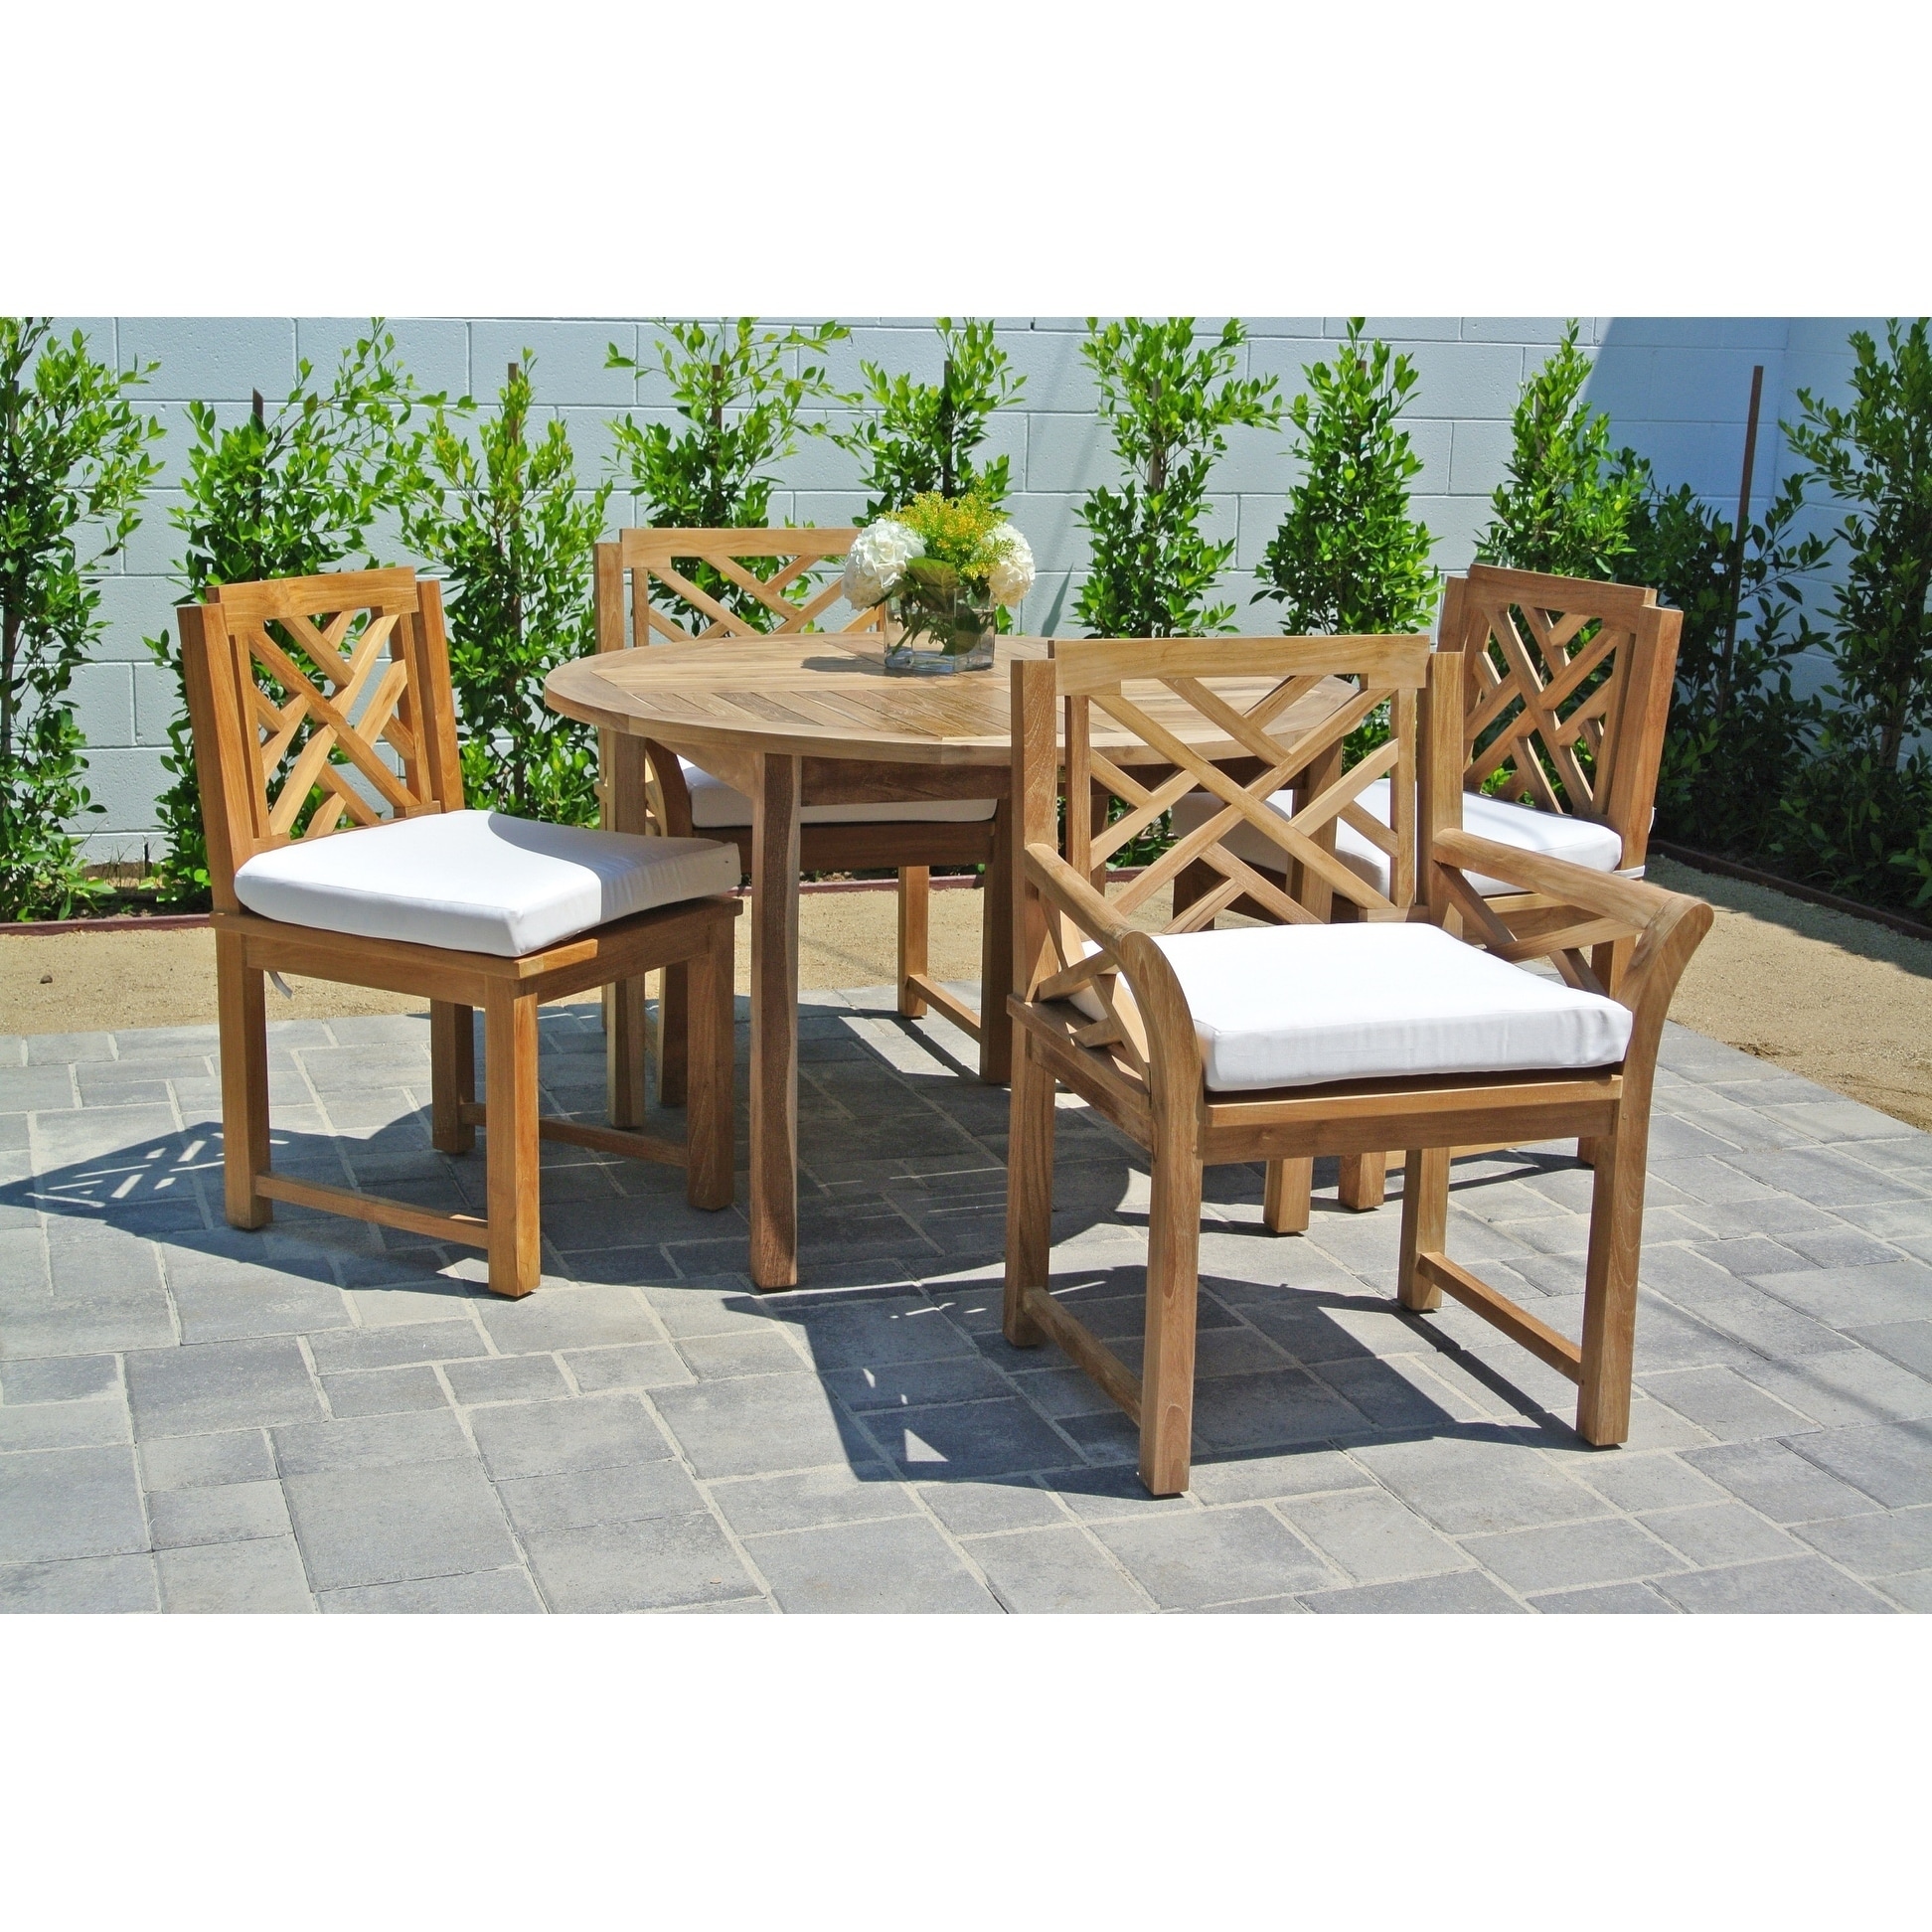 5pc Monterey Teak Outdoor Patio Furniture Dining Set With 48